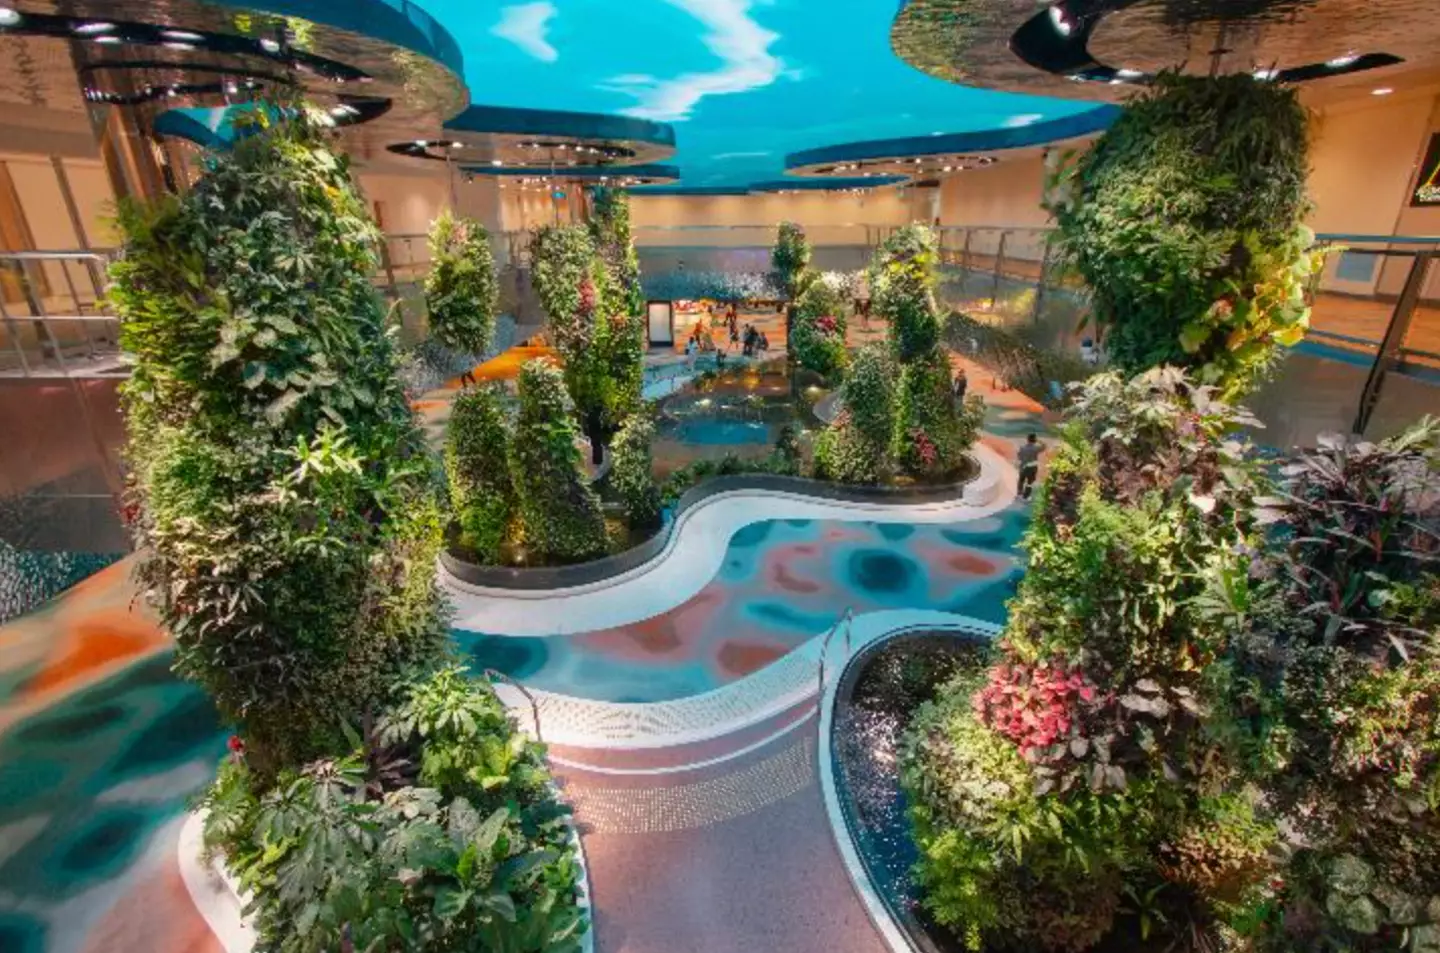 It's not hard to see why Singapore's Changi Airport has been dubbed the world's best airport!